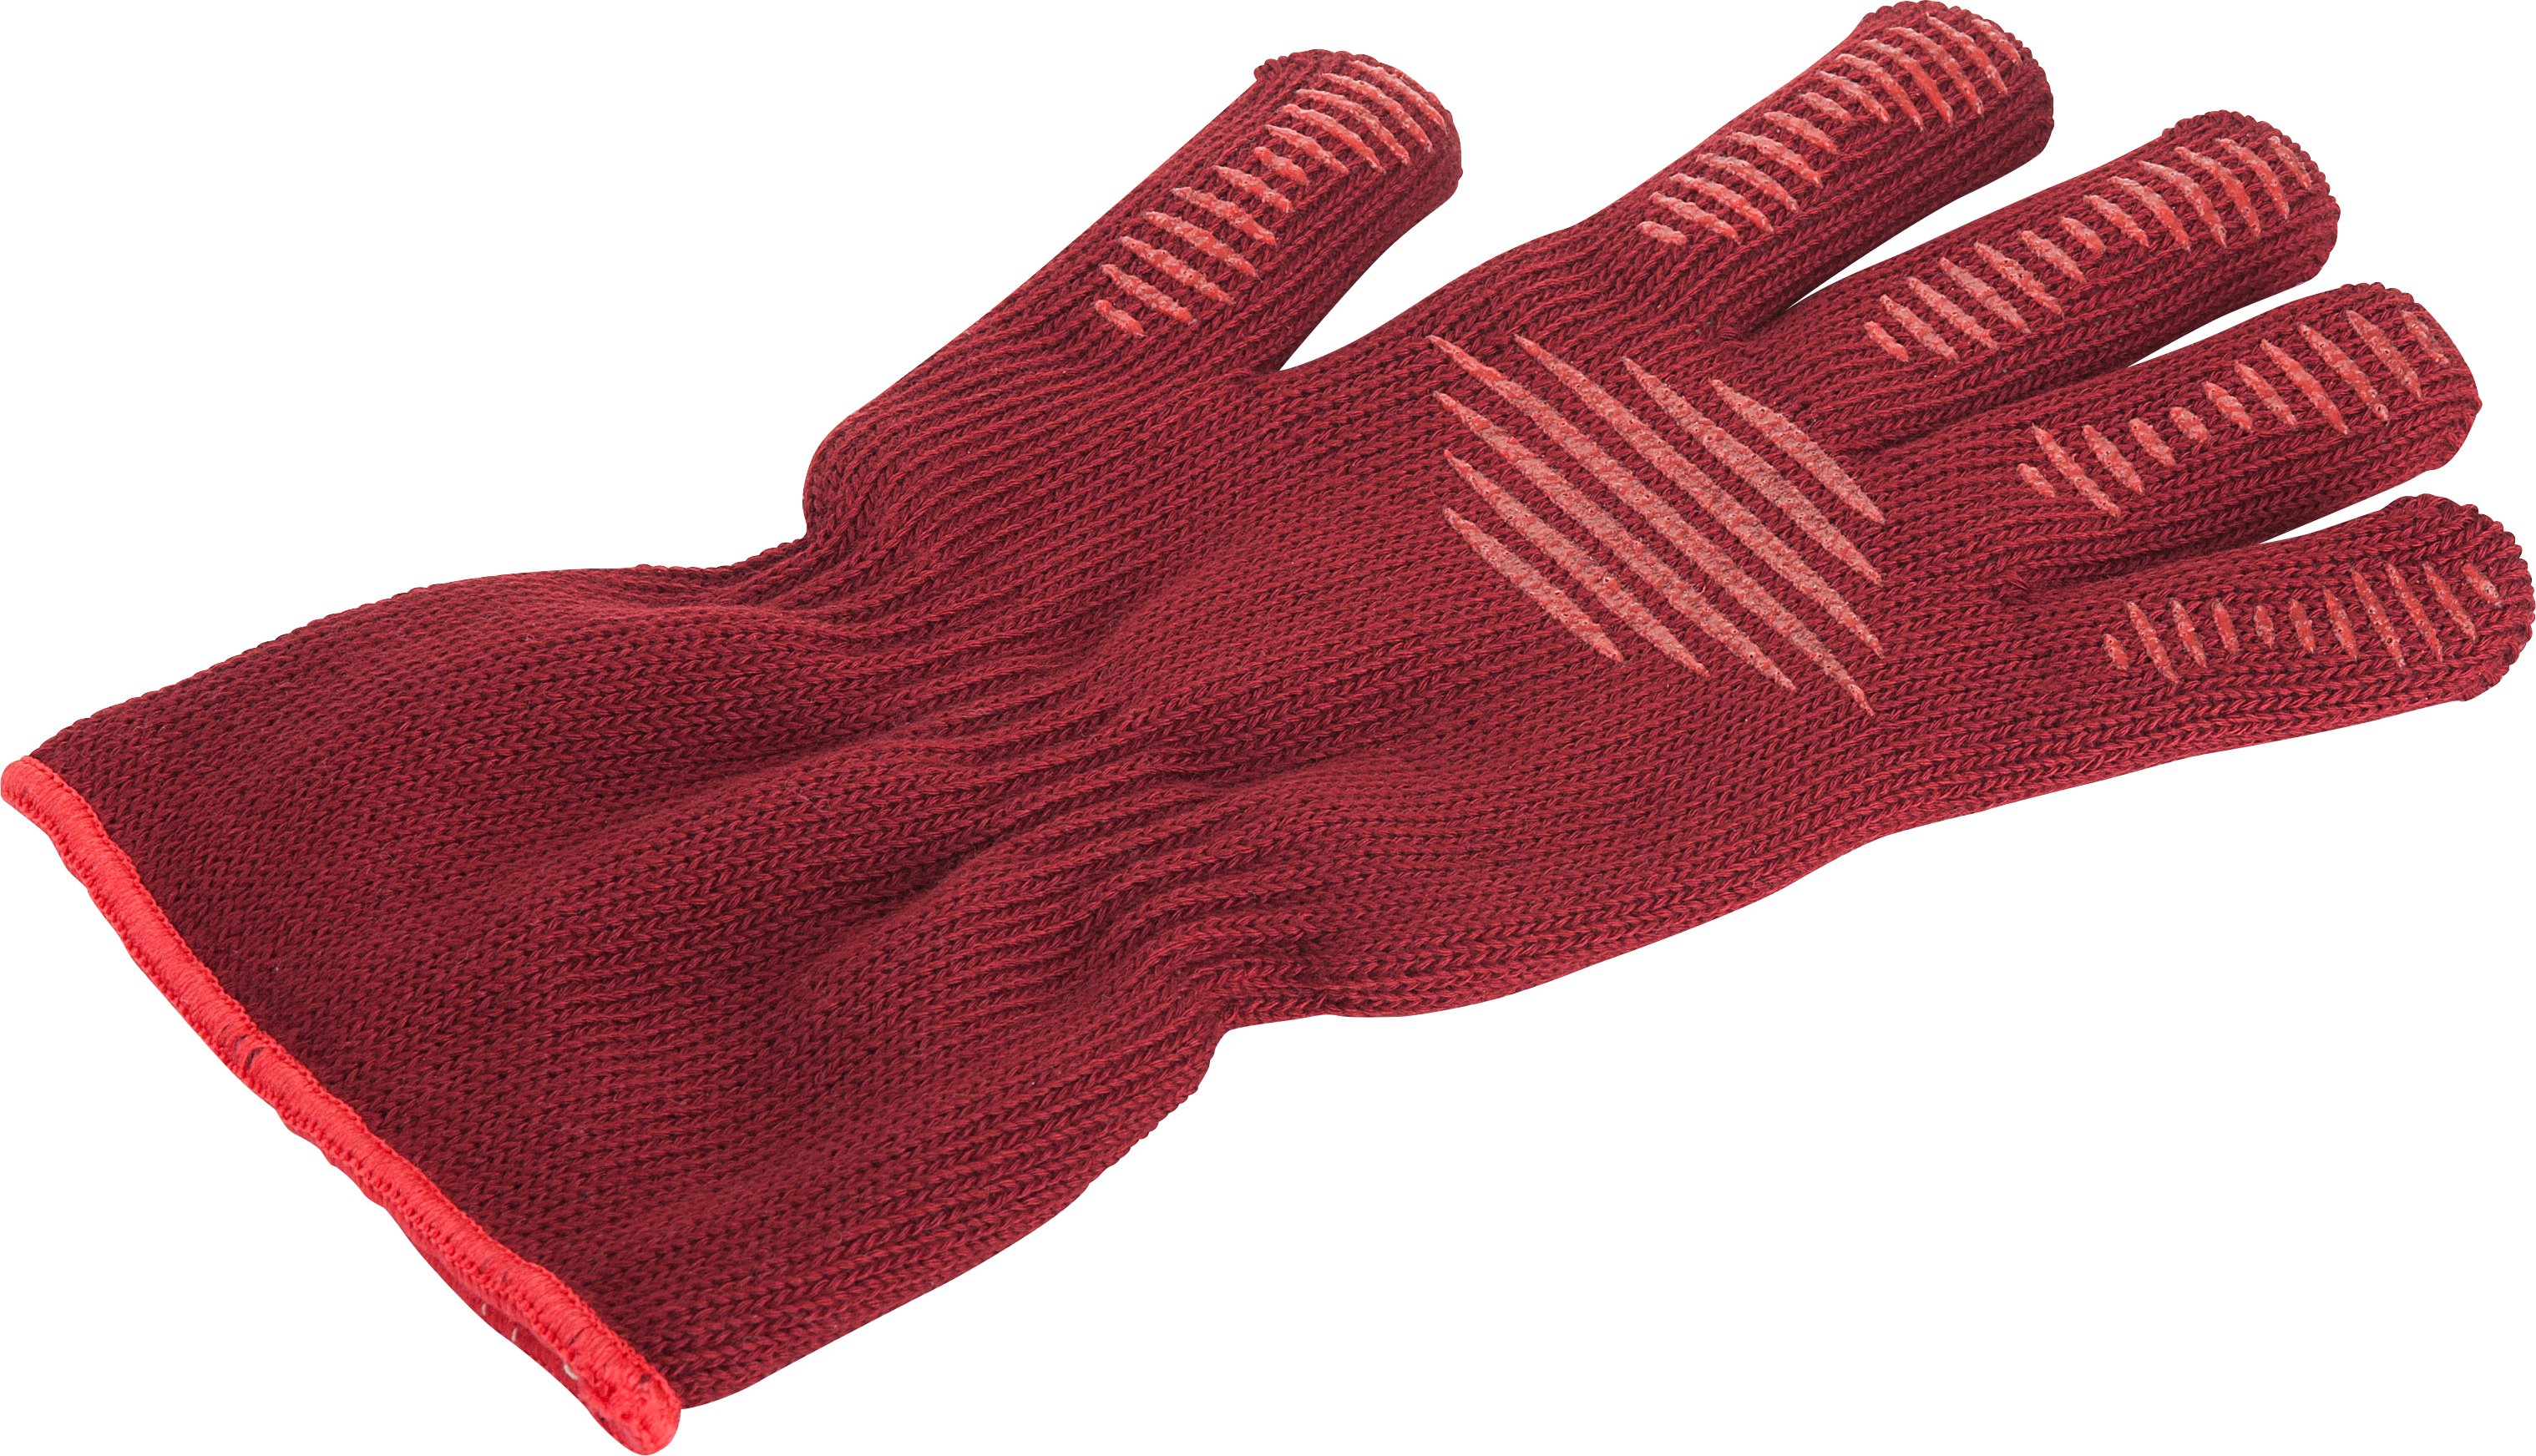 Lodge Red Silicone Hot Handle Holder - Shop Kitchen Linens at H-E-B